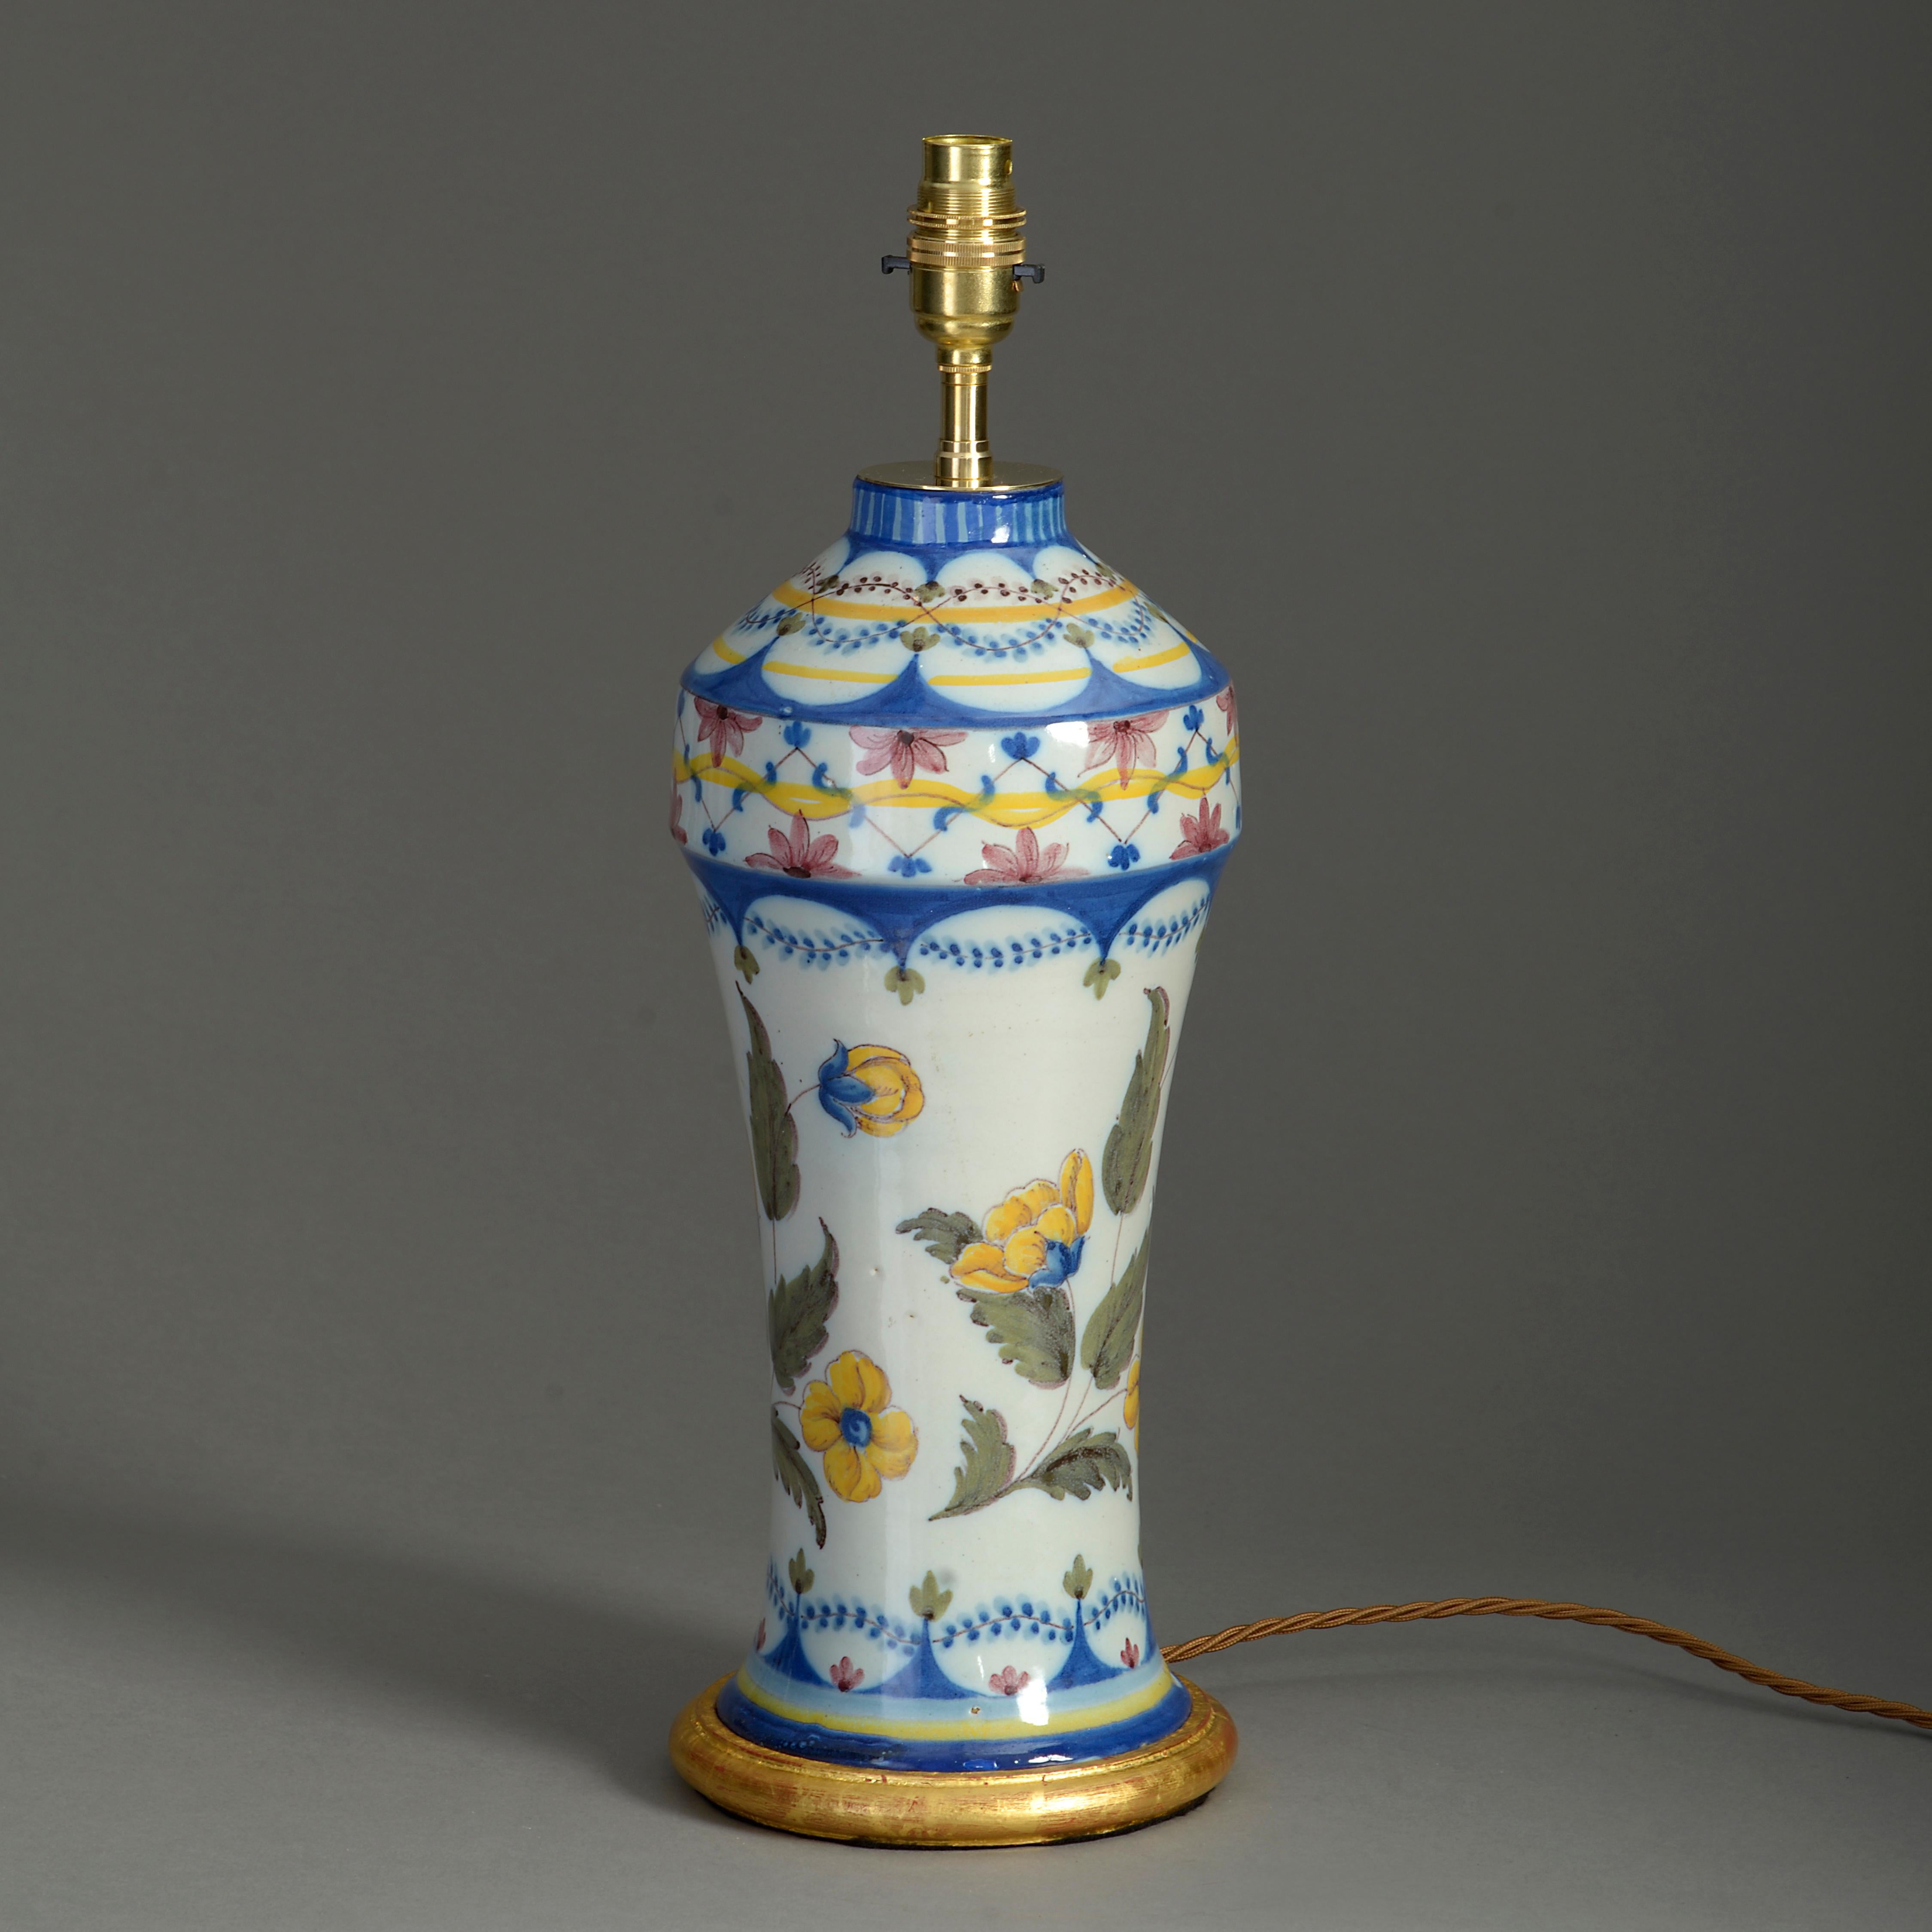 A charming late nineteenth century faience vase, decorated with polychrome glazes depicting flowers and foliage on a white ground. Now mounted as a lamp base and set upon a hand-turned water gilded base.

Dimensions refer to height of